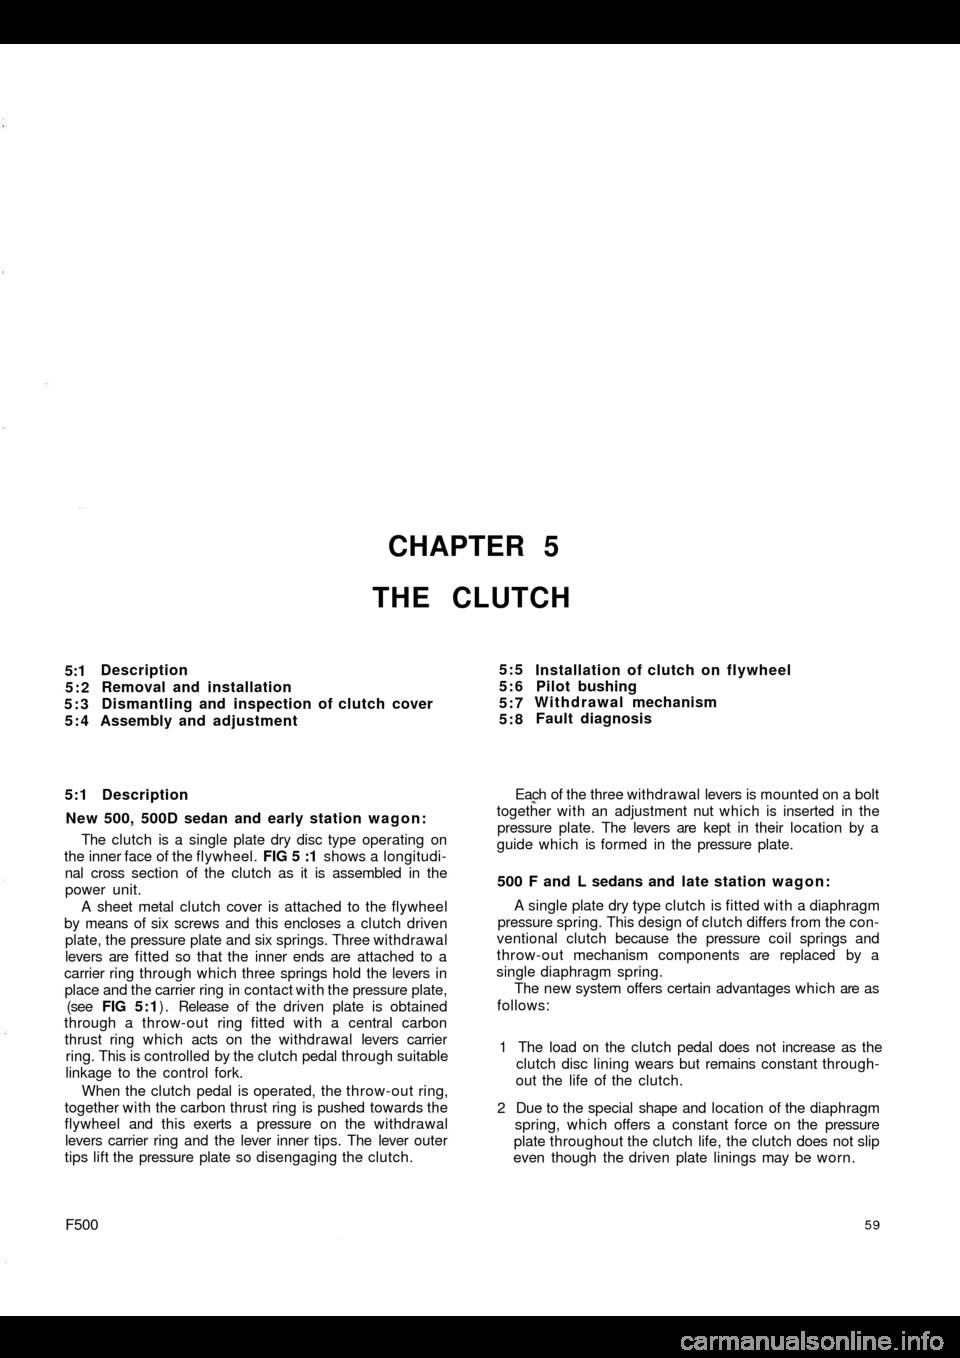 FIAT 500 1968 1.G Workshop Manual CHAPTER 5
THE CLUTCH
5:1
5:2
5:3
5:4Description
Removal and installation
Dismantling and inspection of clutch cover
Assembly and adjustment
5:1 Description
New 500, 500D sedan and early station wagon: